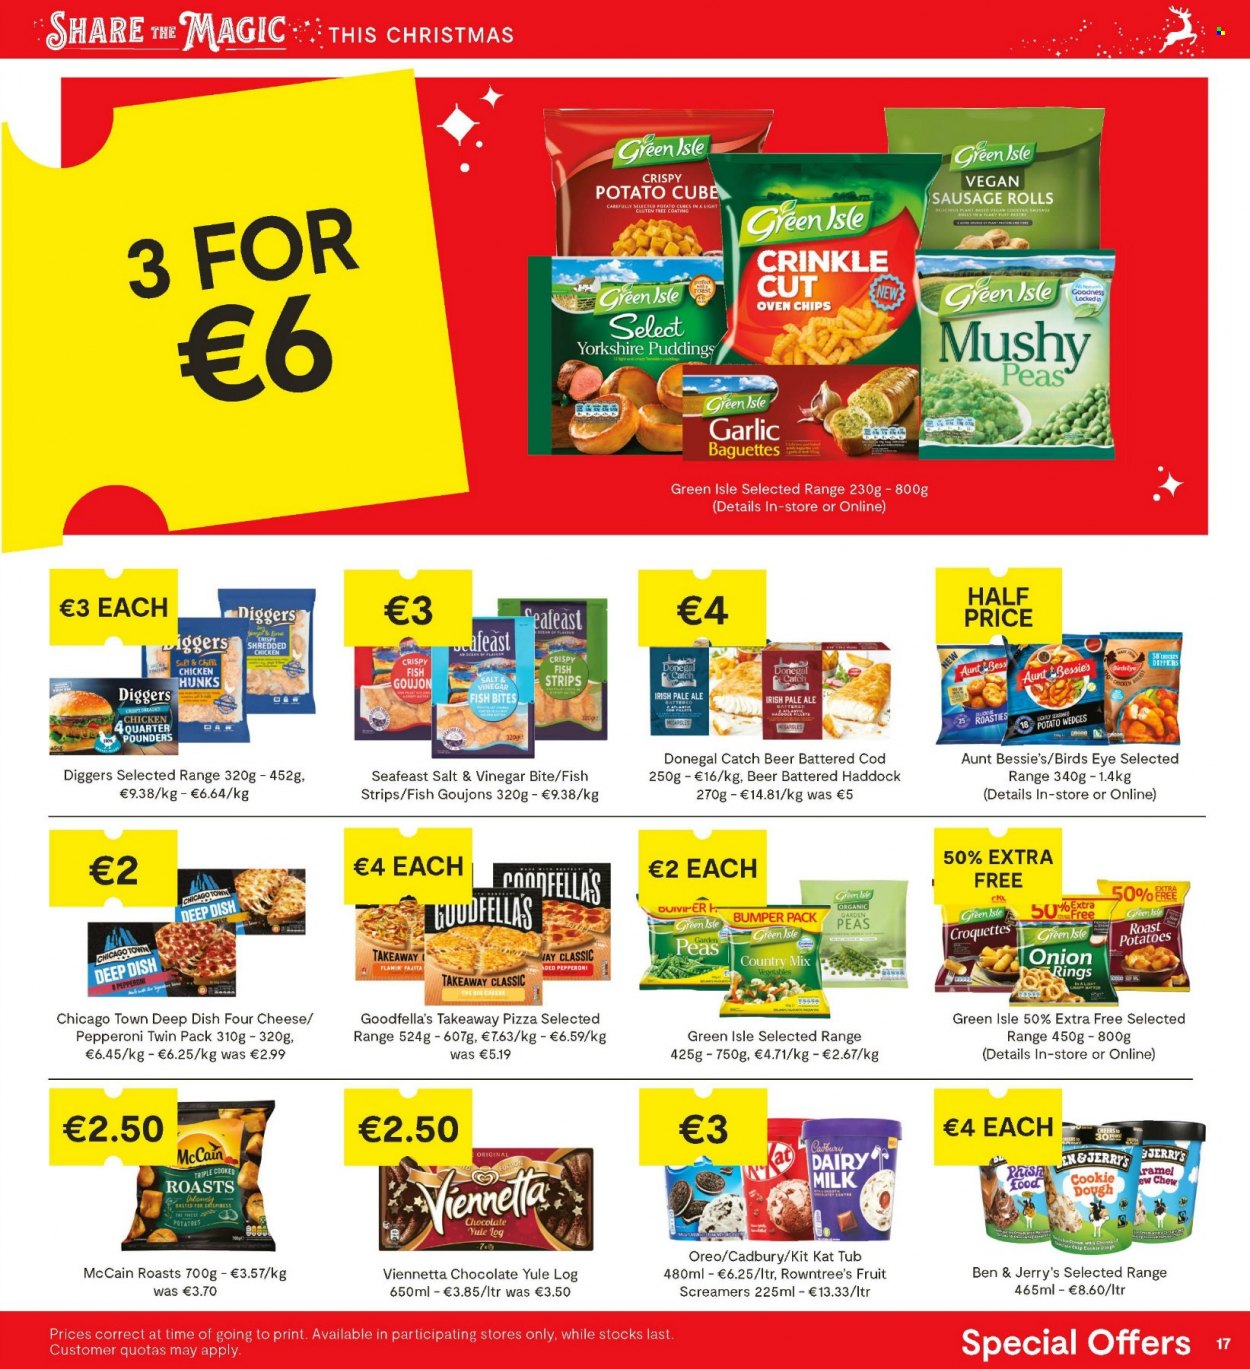 thumbnail - SuperValu offer  - 09.12.2021 - 22.12.2021 - Sales products - baguette, sausage rolls, roasties, Aunt Bessie's, garlic, potatoes, peas, cod, haddock, fish, pizza, onion rings, Bird's Eye, fajita, sausage, pepperoni, Oreo, milk, Ben & Jerry's, Donegal Catch, strips, McCain, potato wedges, potato croquettes, frozen chips, chocolate, KitKat, Cadbury, beer. Page 17.